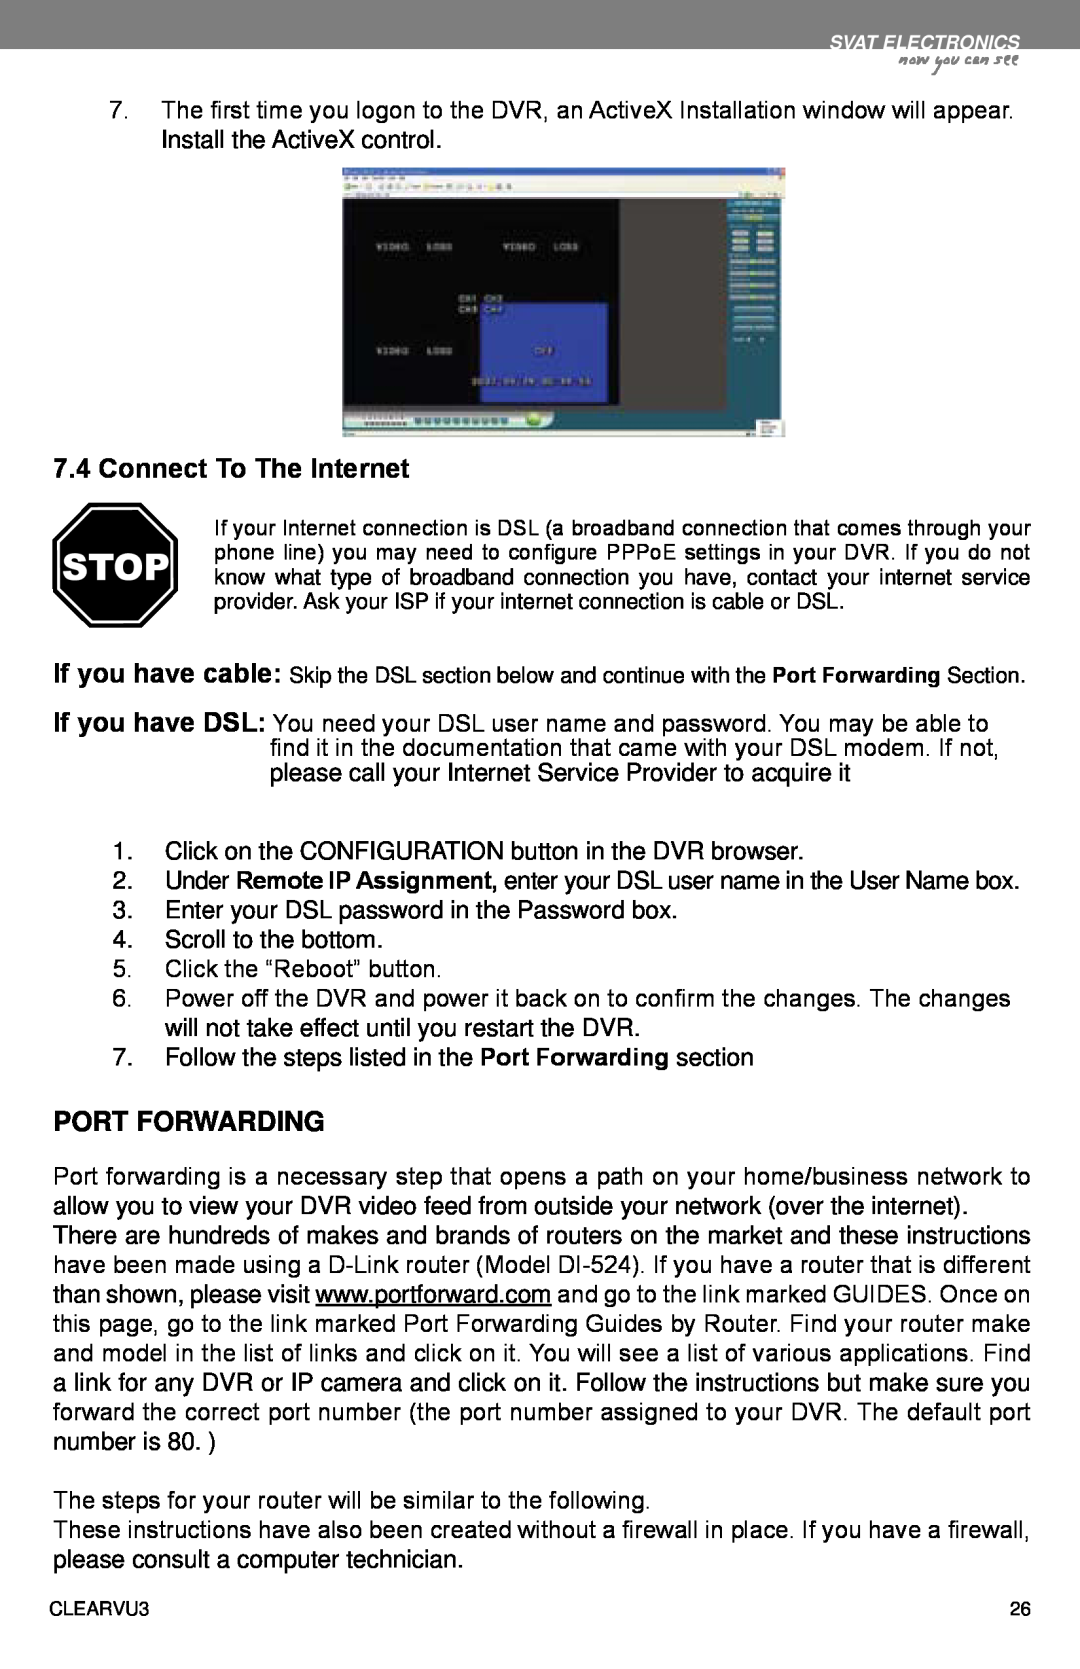 SVAT Electronics CLEARVU3 instruction manual Connect To The Internet, Port Forwarding, now you can see 